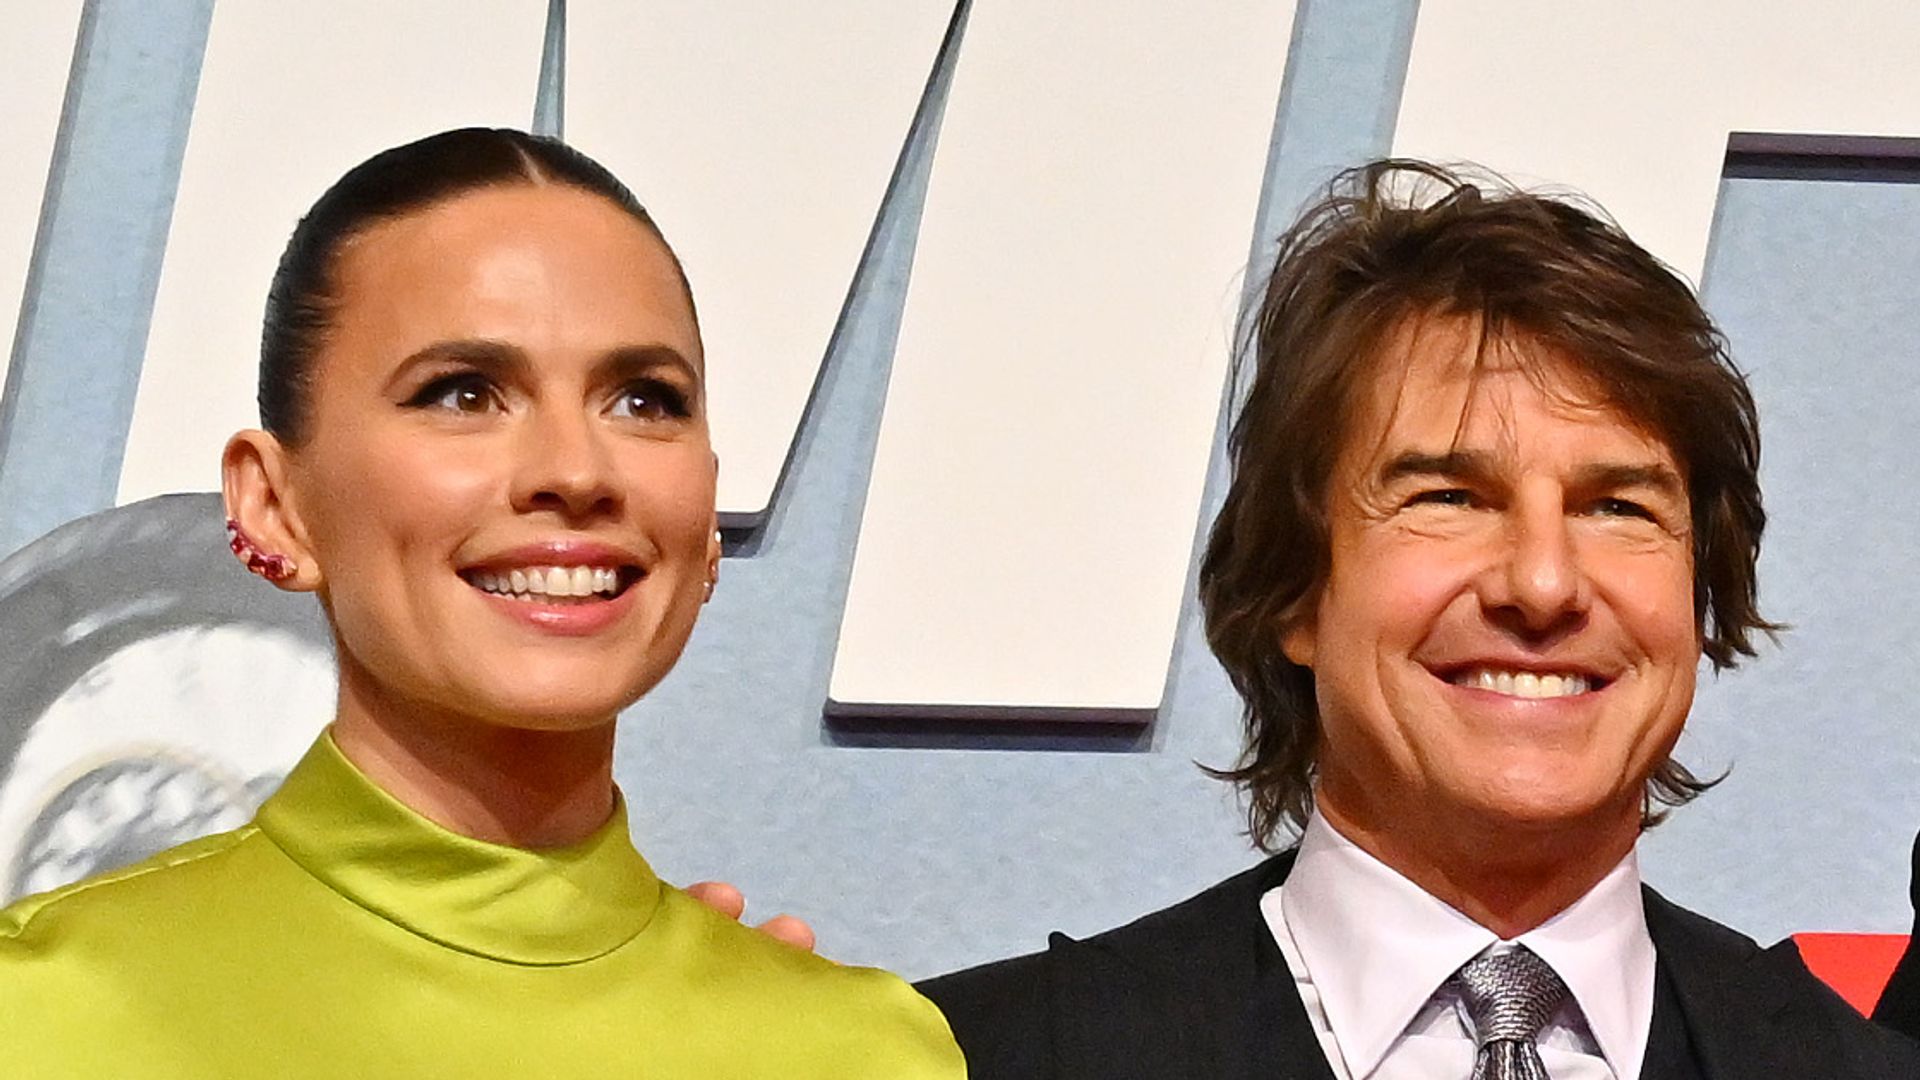 Tom Cruise and Hayley Atwell turn heads as actor cozies up to glamorous co-star